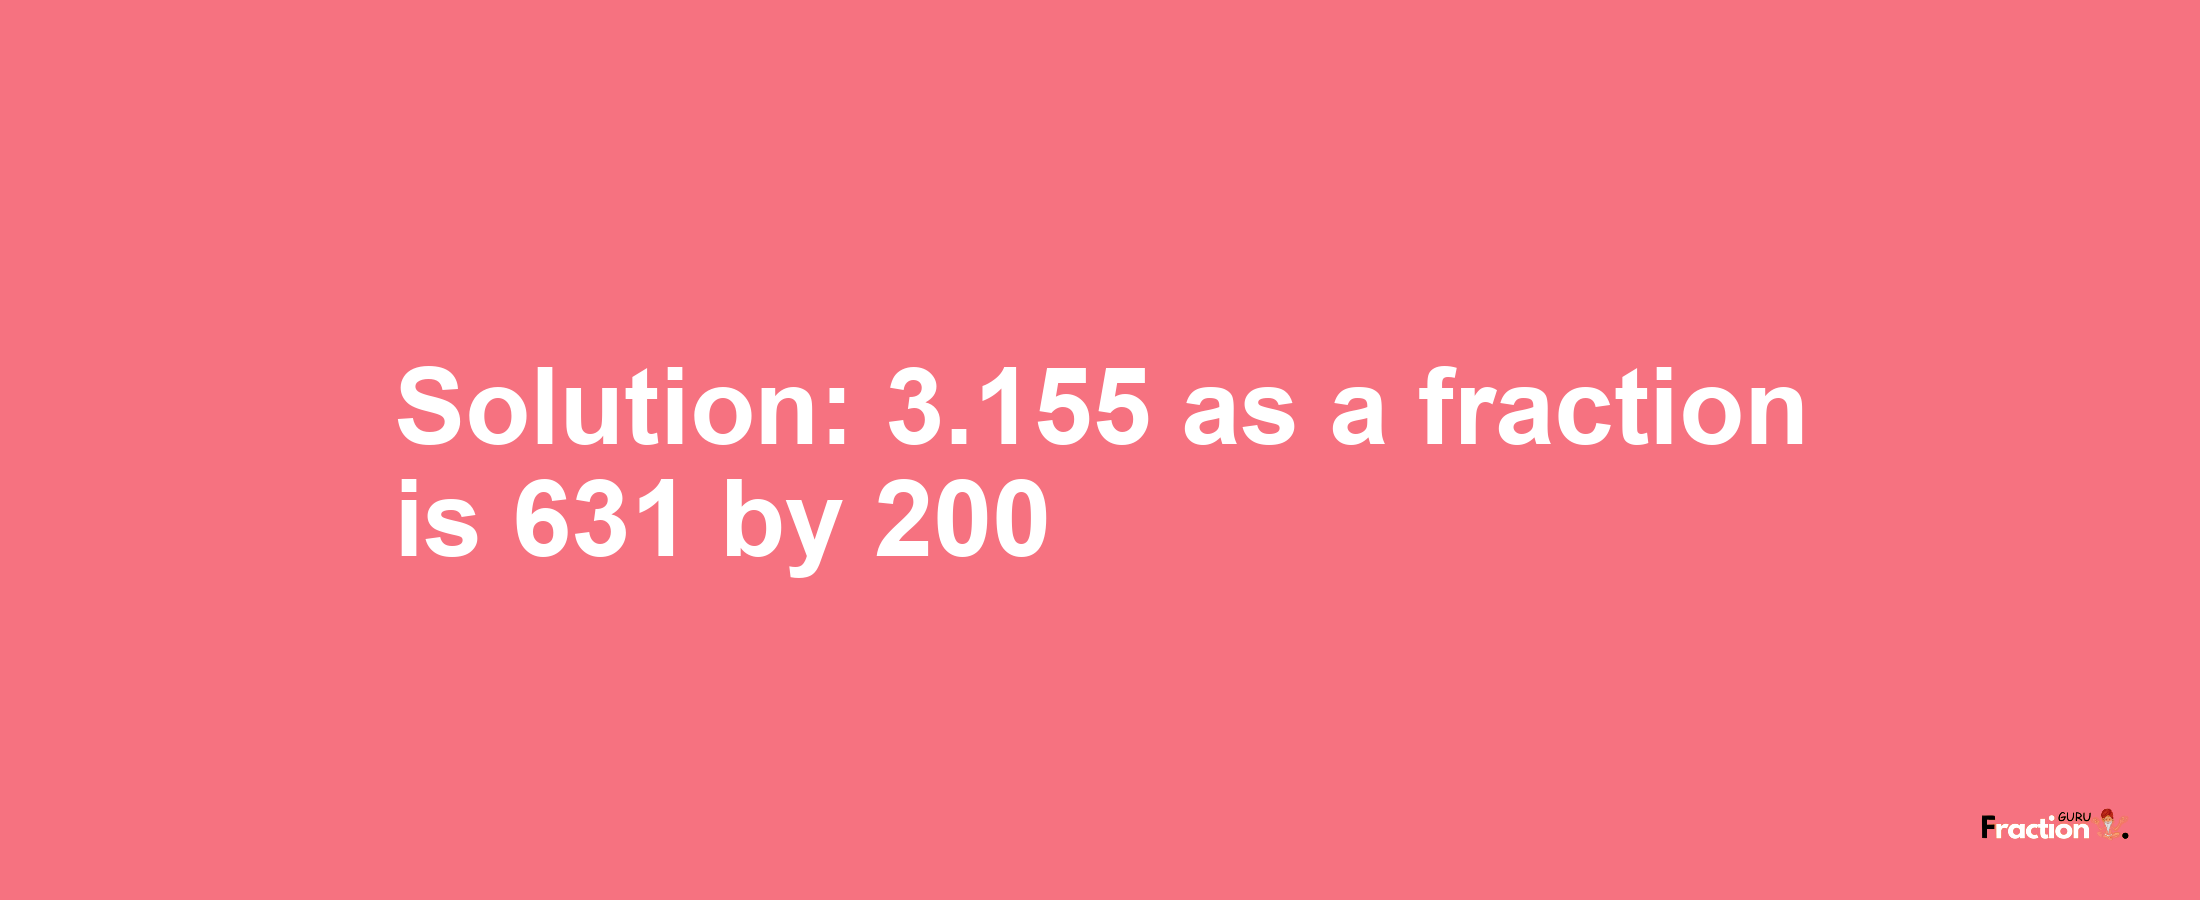 Solution:3.155 as a fraction is 631/200